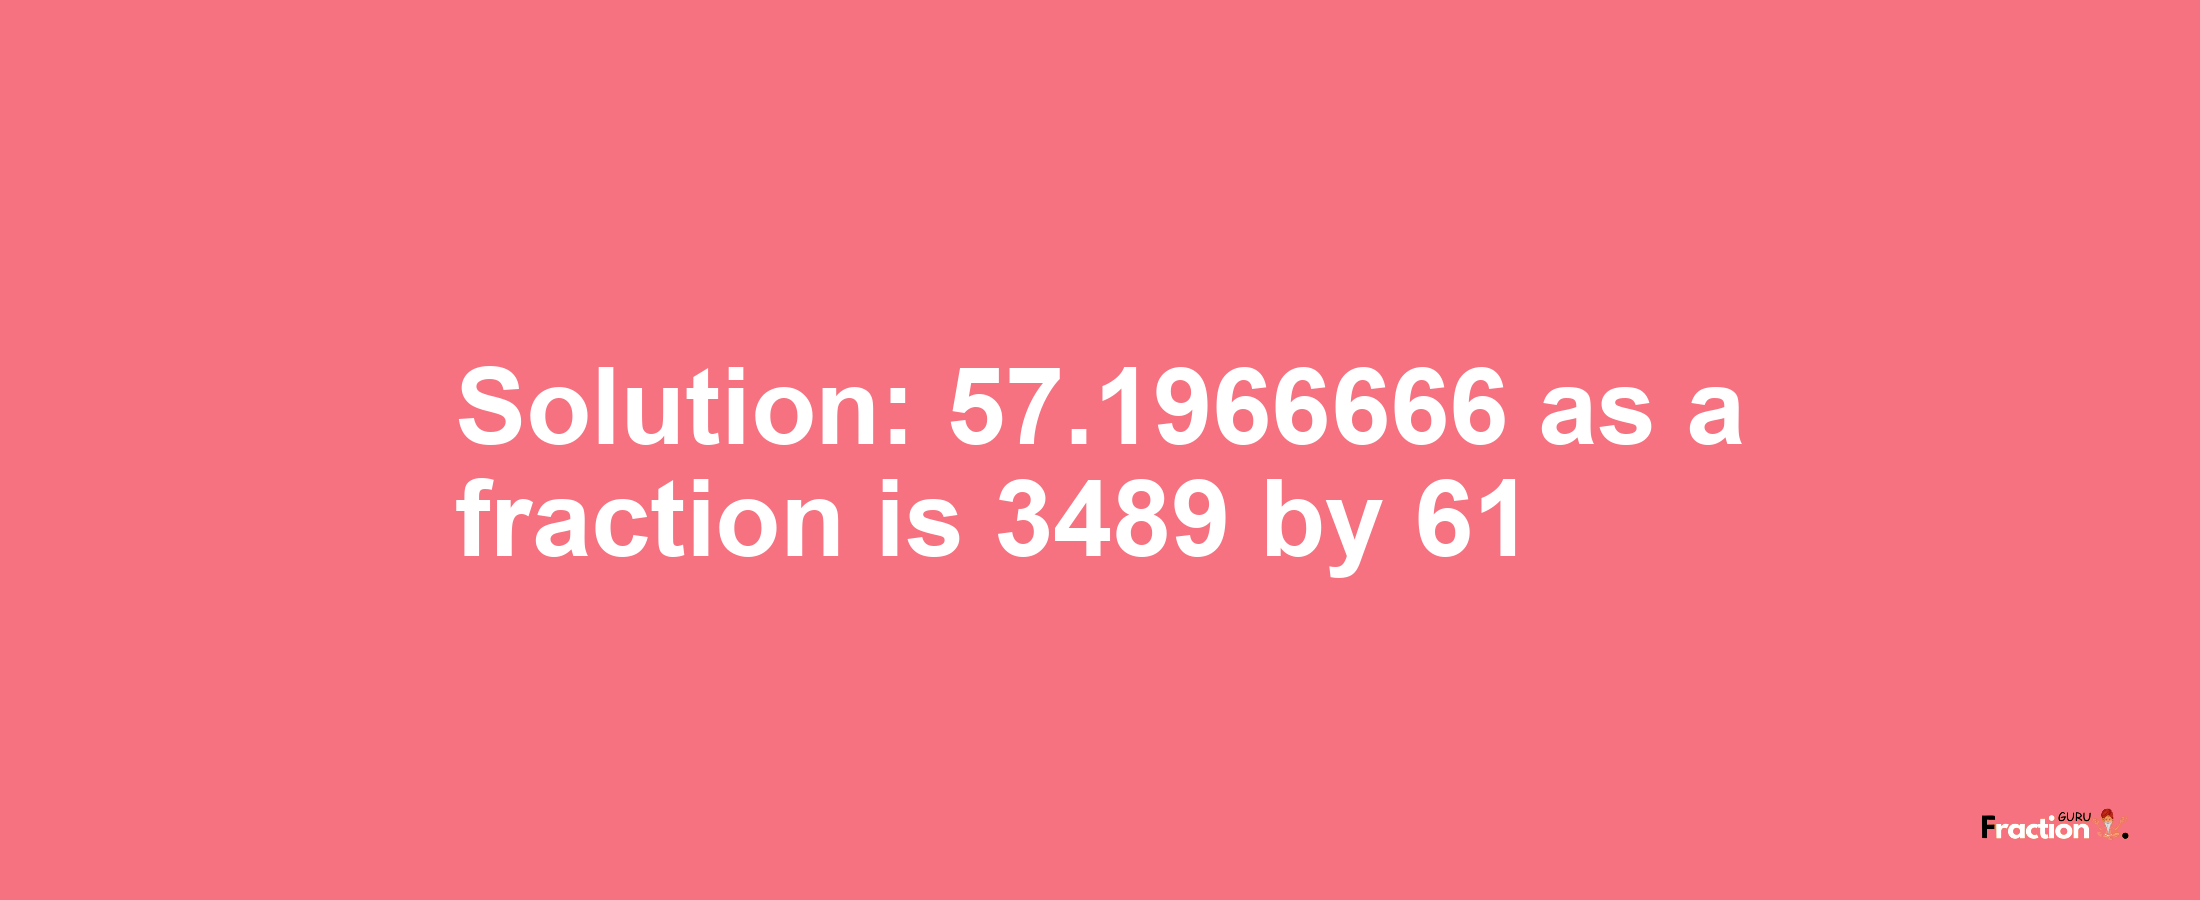 Solution:57.1966666 as a fraction is 3489/61